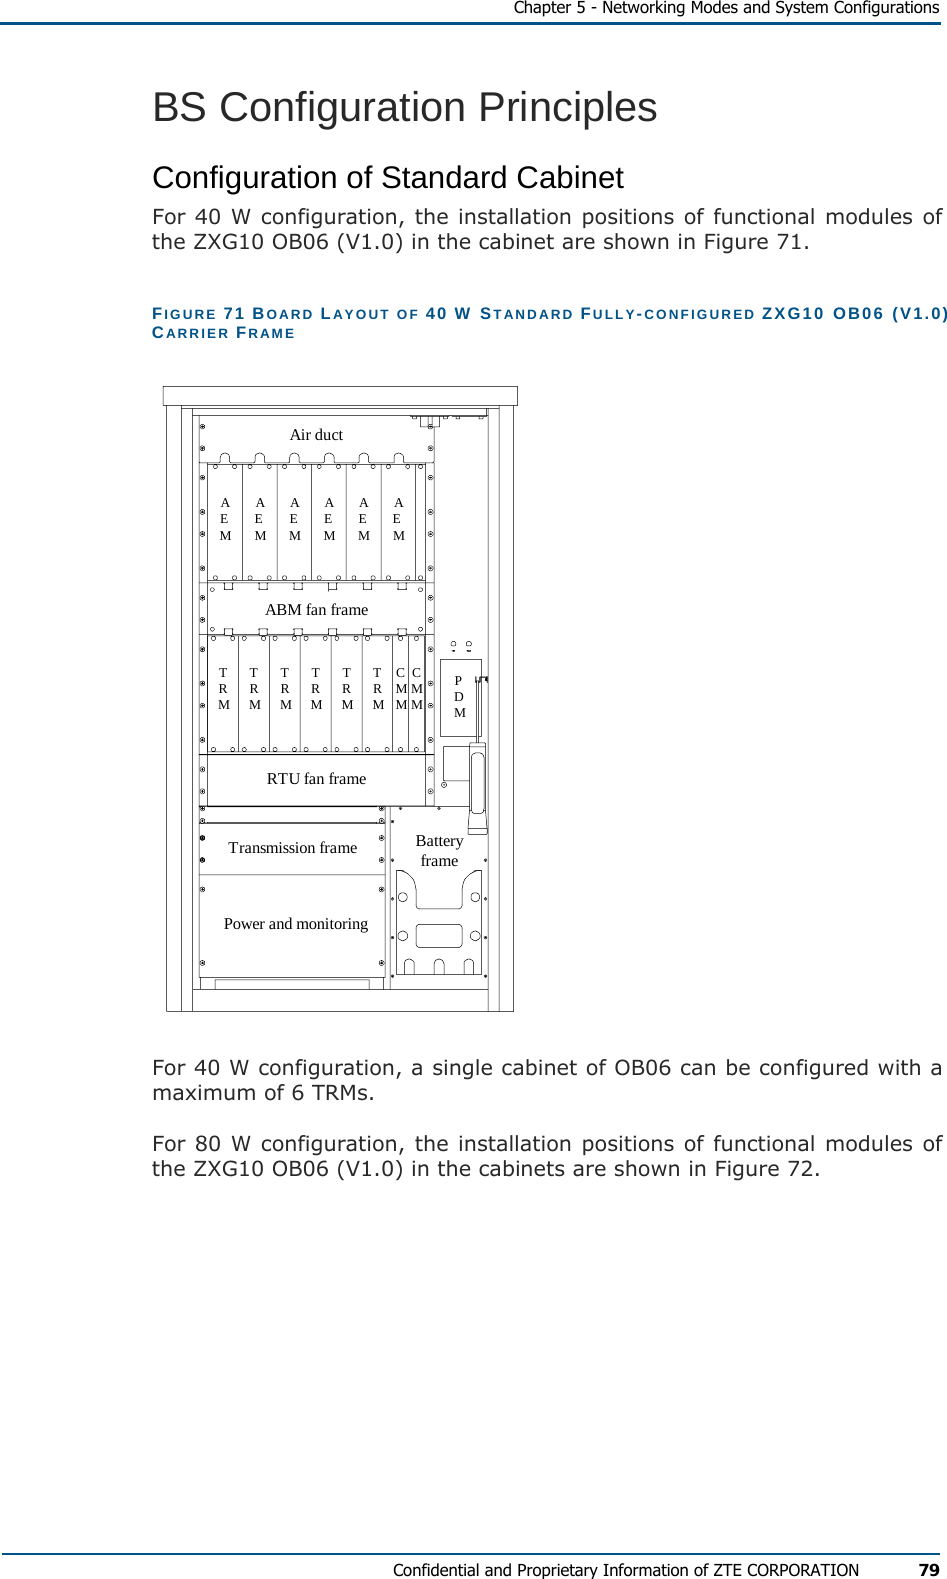    Chapter 5 - Networking Modes and System Configurations Confidential and Proprietary Information of ZTE CORPORATION 79 BS Configuration Principles Configuration of Standard Cabinet For 40 W configuration, the installation positions of functional modules of the ZXG10 OB06 (V1.0) in the cabinet are shown in Figure 71. FIGURE 71 BOARD LAYOUT OF 40 W STANDARD FULLY-CONFIGURED ZXG10 OB06 (V1.0) CARRIER FRAME  PDMBatteryframePower and monitoringTransmission frameRTU fan frameCMMCMMTRMTRMTRMTRMTRMTRMABM fan frameAir ductAEMAEMAEMAEMAEMAEM For 40 W configuration, a single cabinet of OB06 can be configured with a maximum of 6 TRMs. For 80 W configuration, the installation positions of functional modules of the ZXG10 OB06 (V1.0) in the cabinets are shown in Figure 72. 